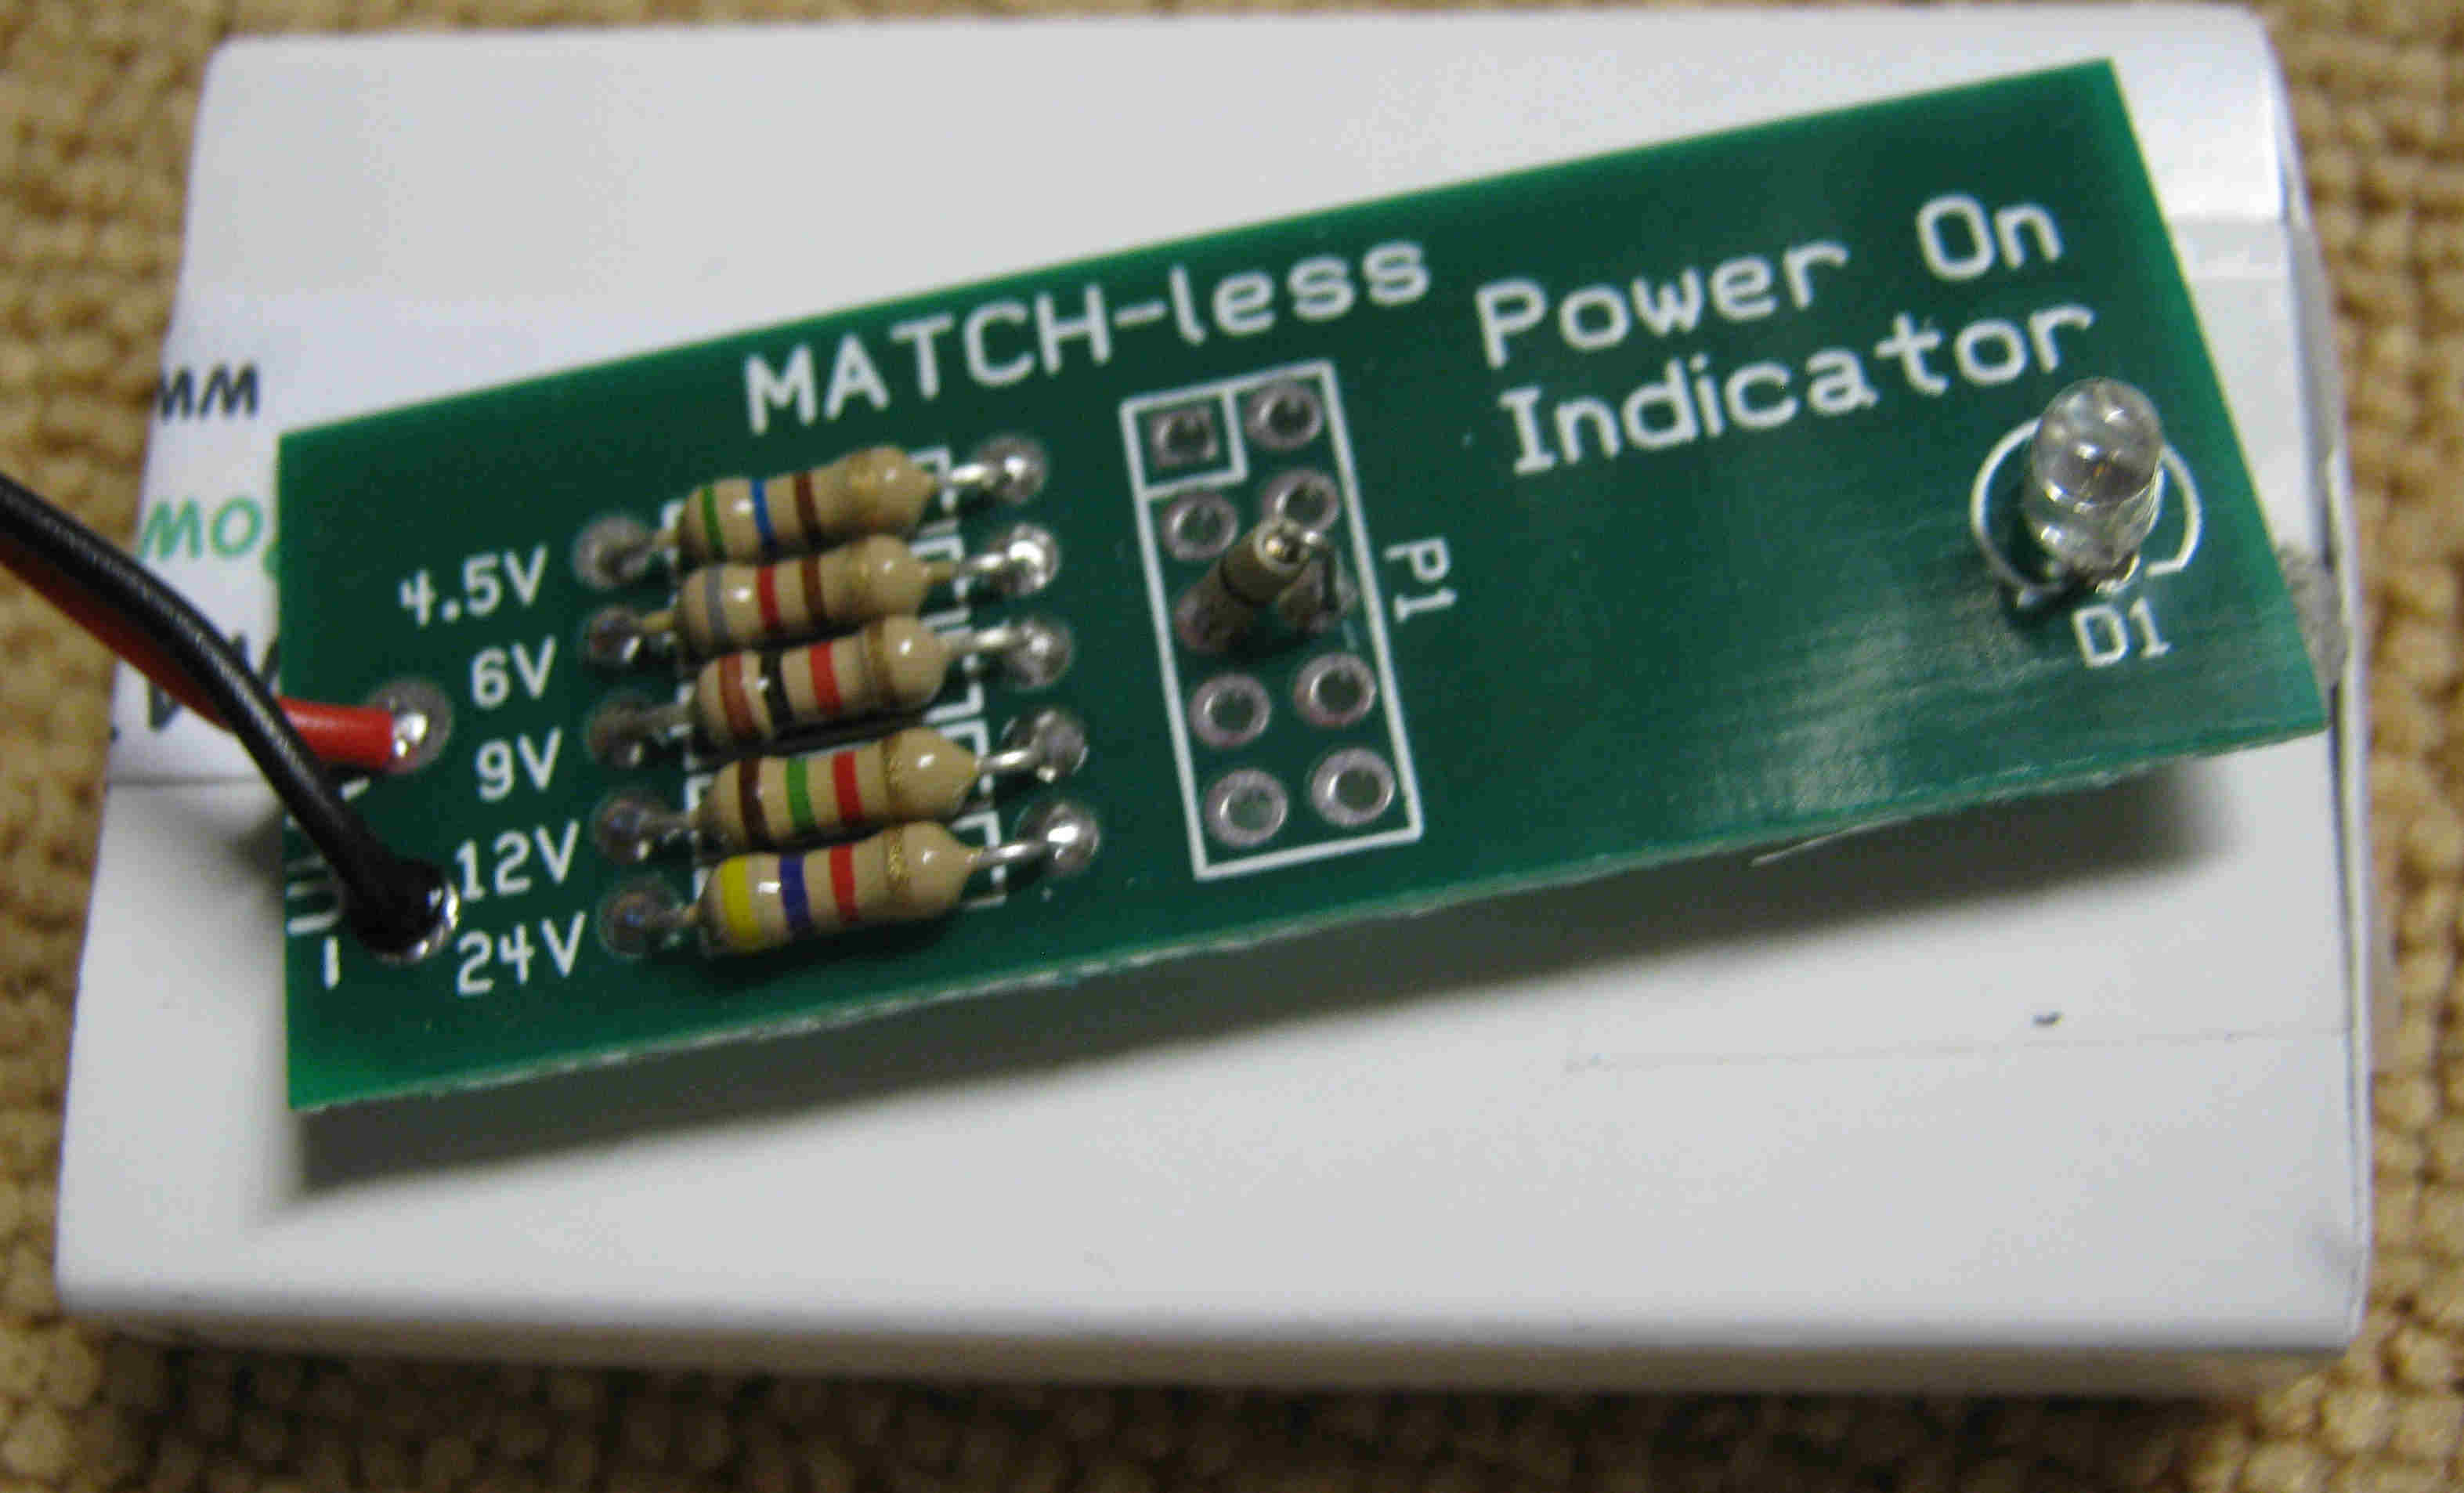 Picture of Match-less PowerON LED